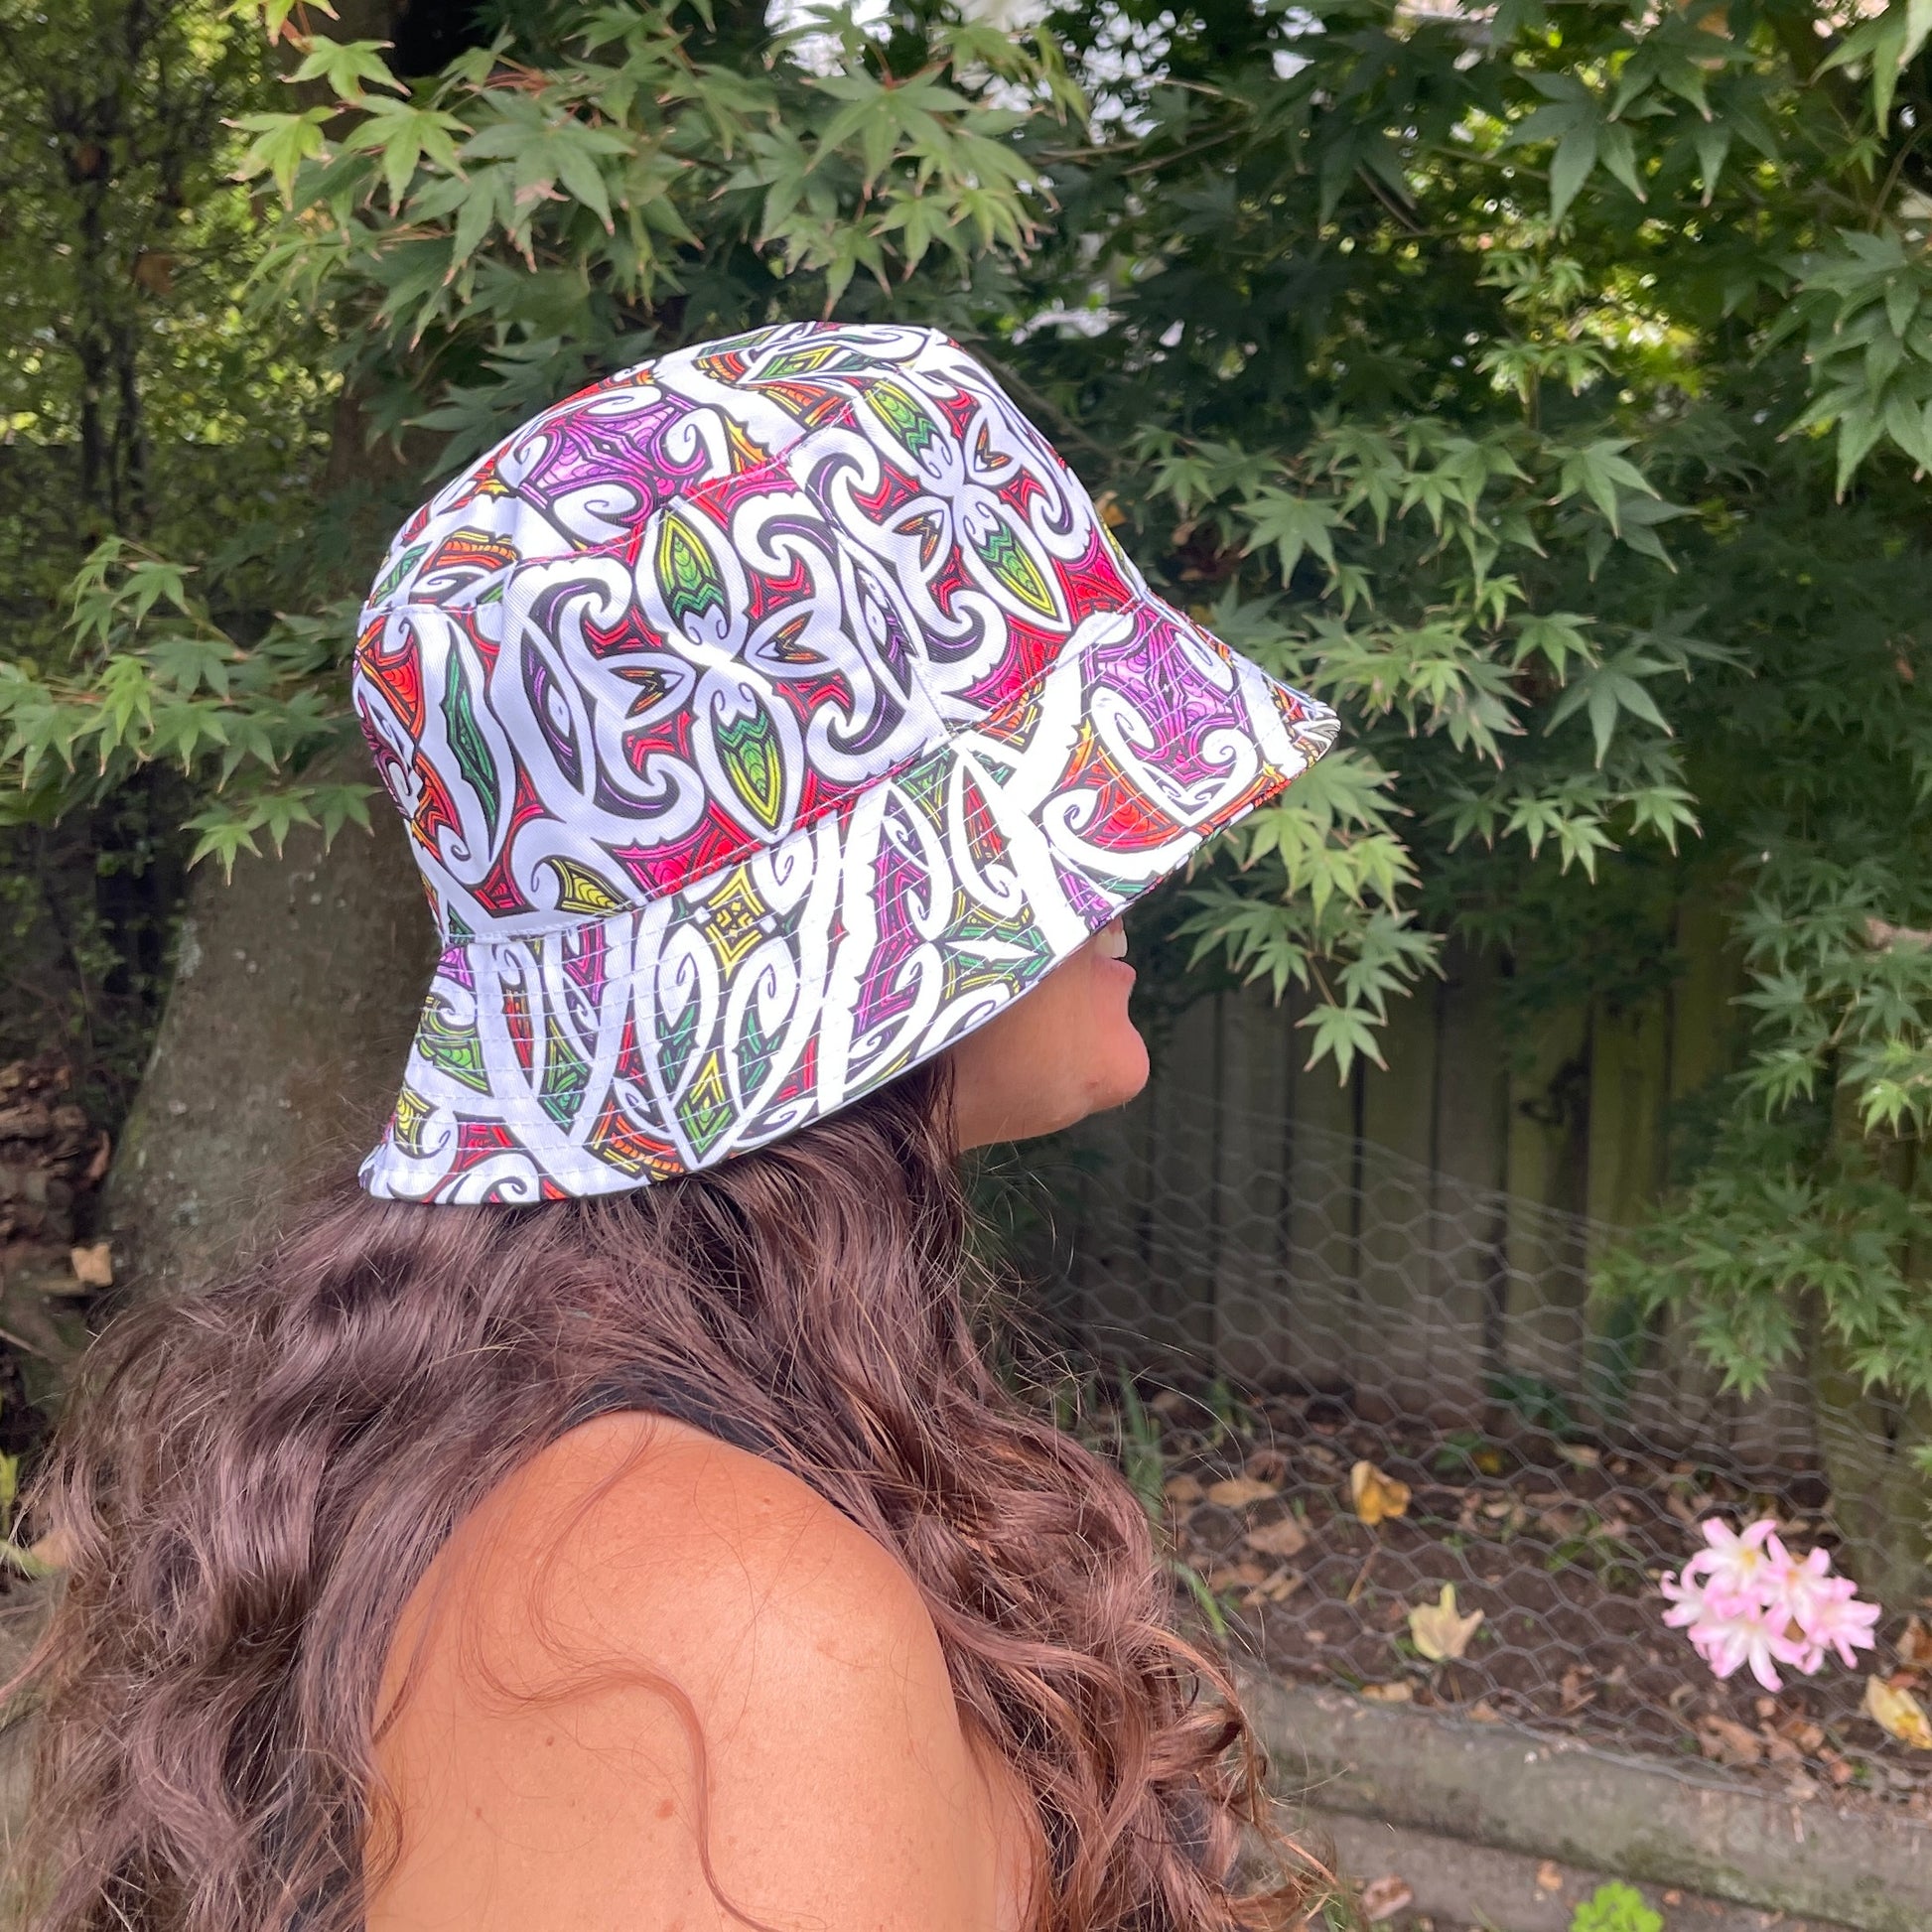 Side profile of a woman with long brown hair head wearing a bucket hat in bright colours with koru patterns in white printed on it.